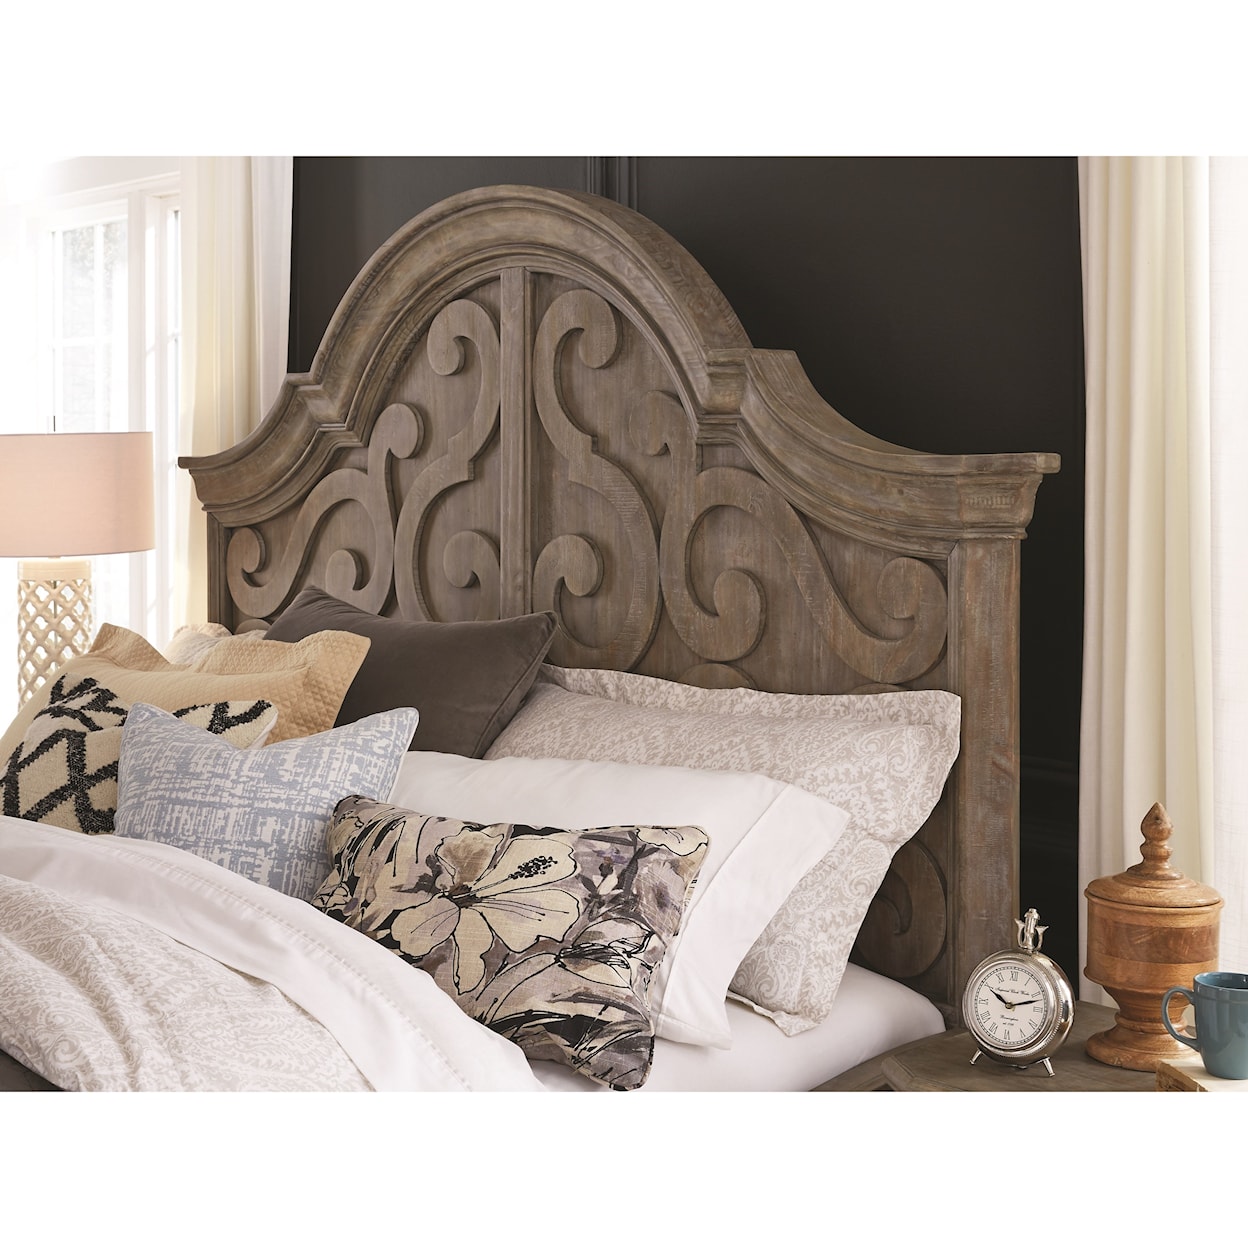 Magnussen Home Tinley Park Bedroom California King Arched Panel Bed